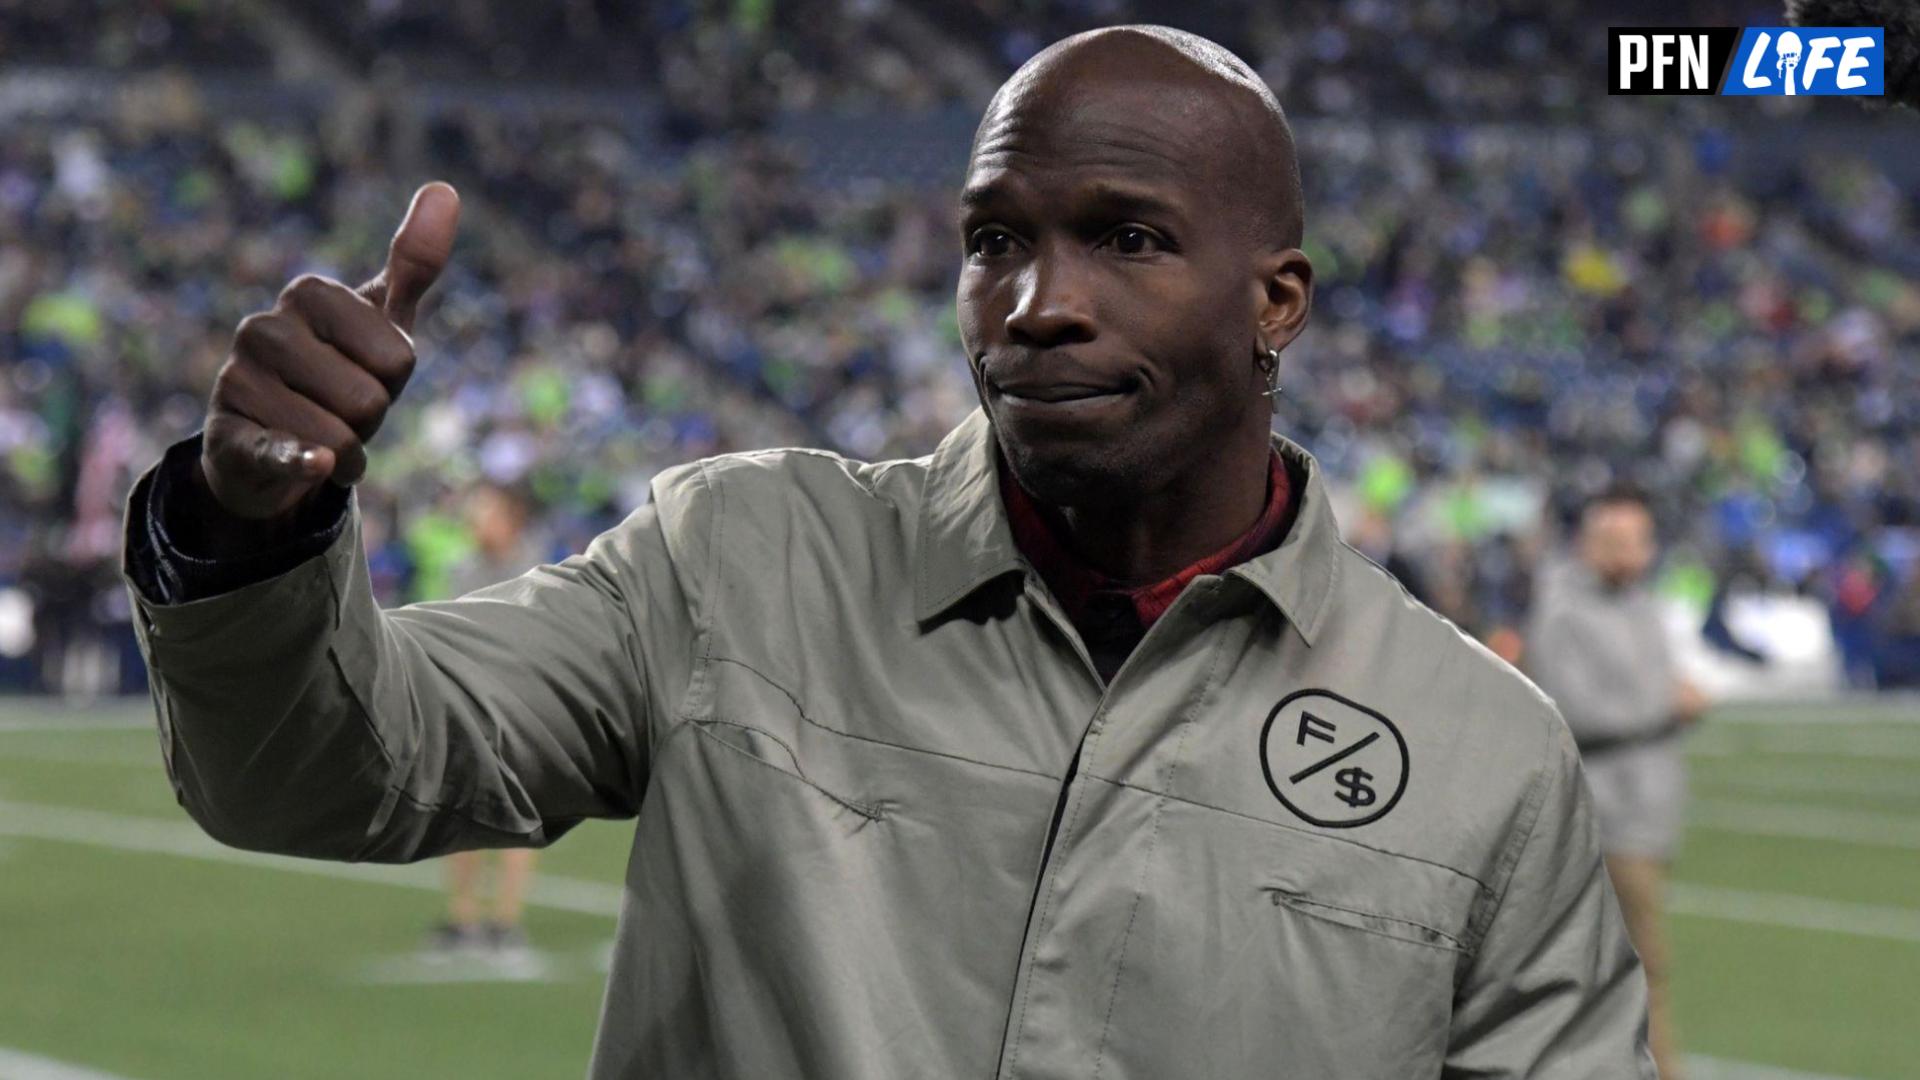 Chad Johnson (Chad Ochocinco) attends the NFL game between the Minnesota Vikings and the Seattle Seahawks at CenturyLink Field.